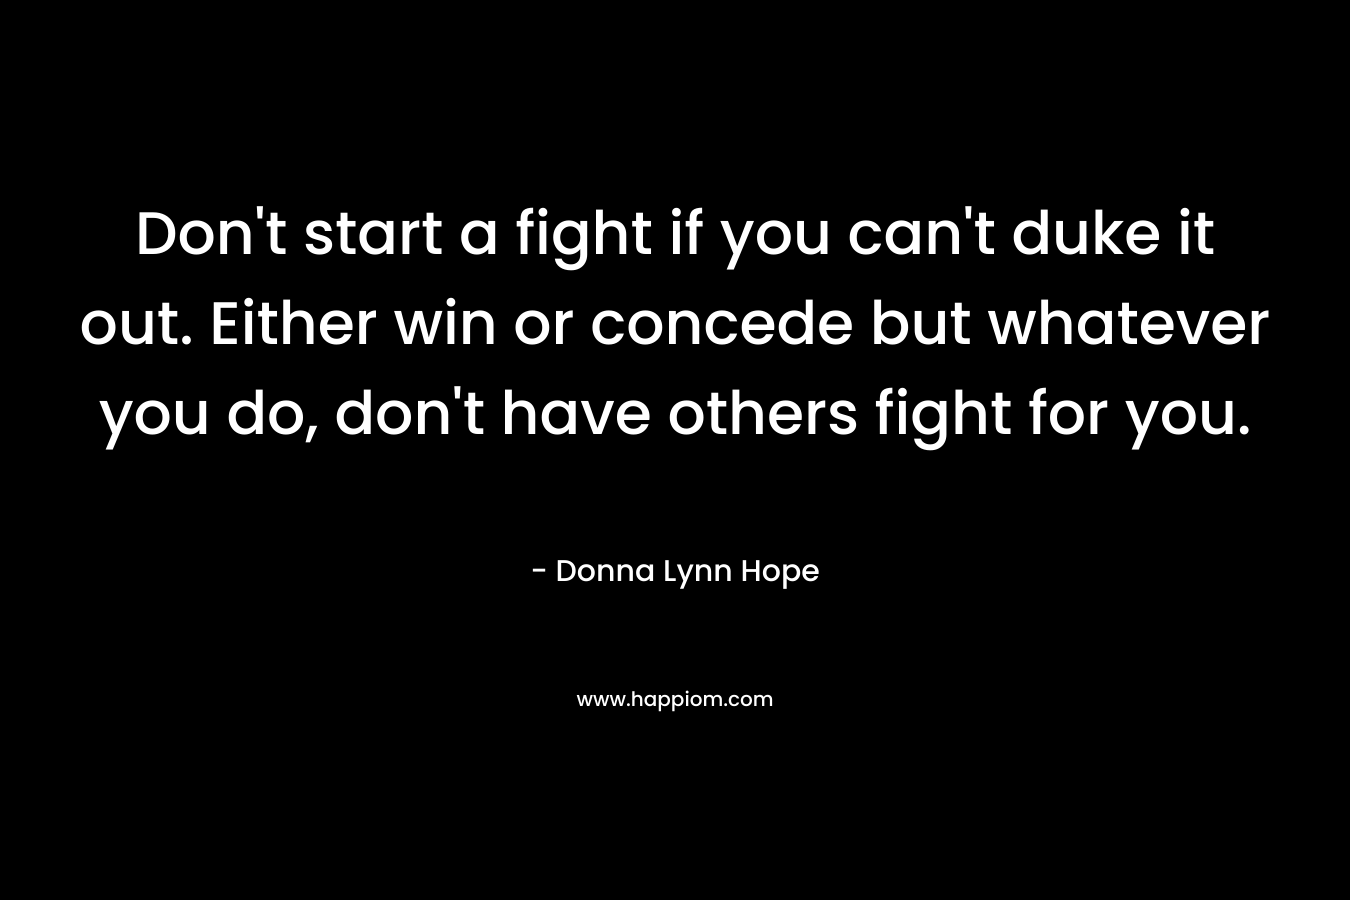 Don’t start a fight if you can’t duke it out. Either win or concede but whatever you do, don’t have others fight for you. – Donna Lynn Hope